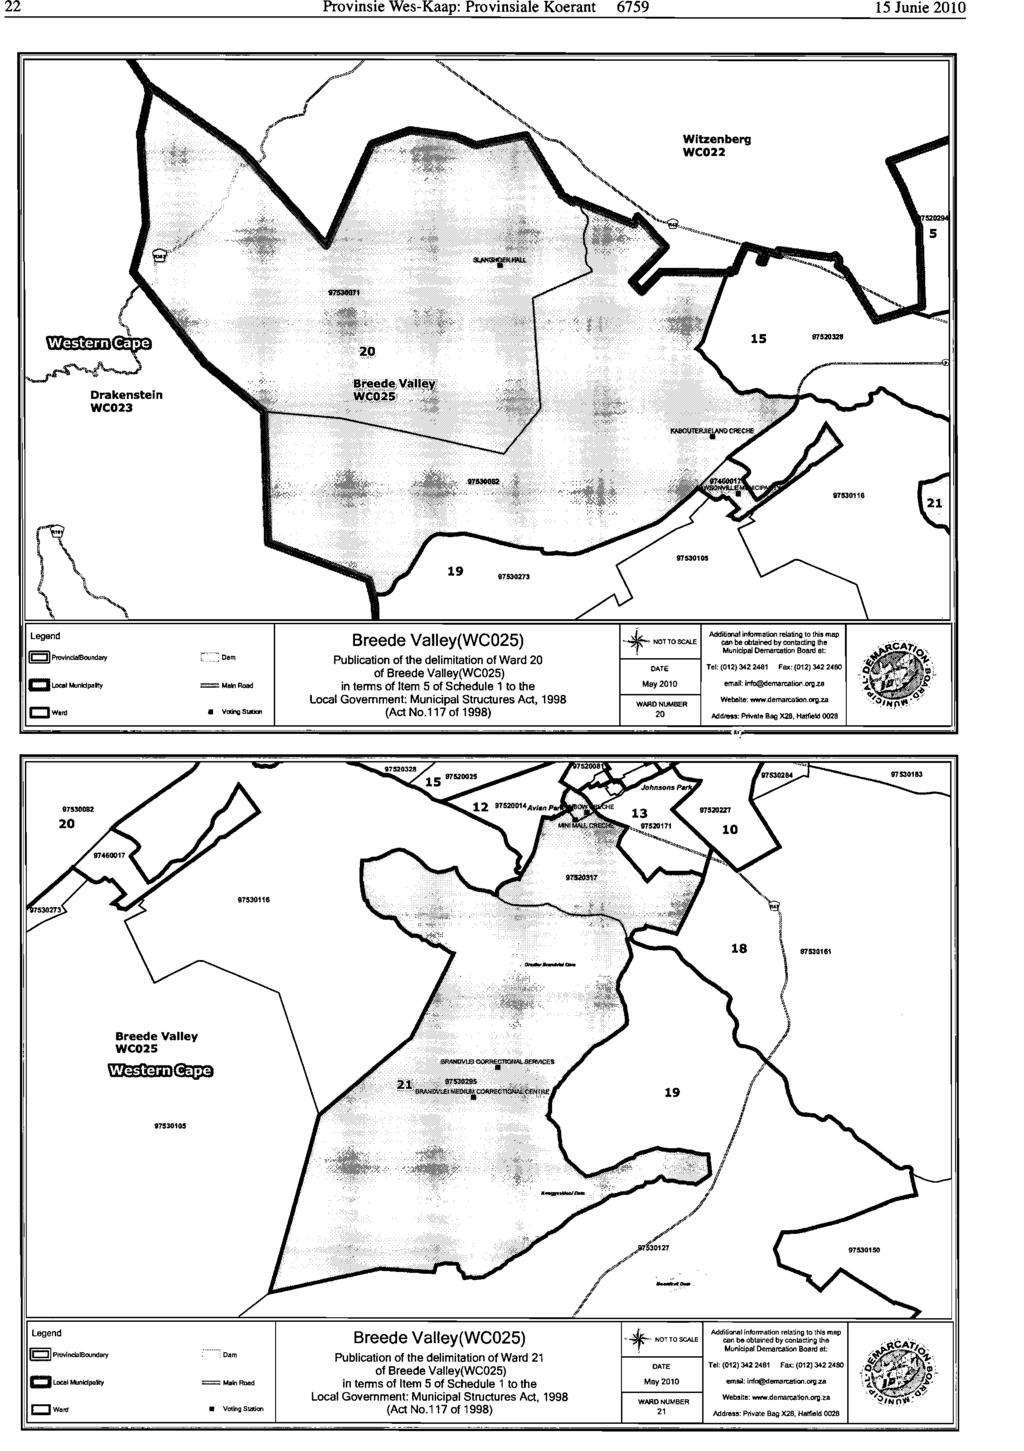 22 Provinsie Wes-Kaap: Provinsiale Koerant 6759 15 Junie 2010 Witzenberg We022 r::jward Publication of the delimitation of Ward 20 01 Breede Valley(WC025) Local Government; Municipal Structures Act,